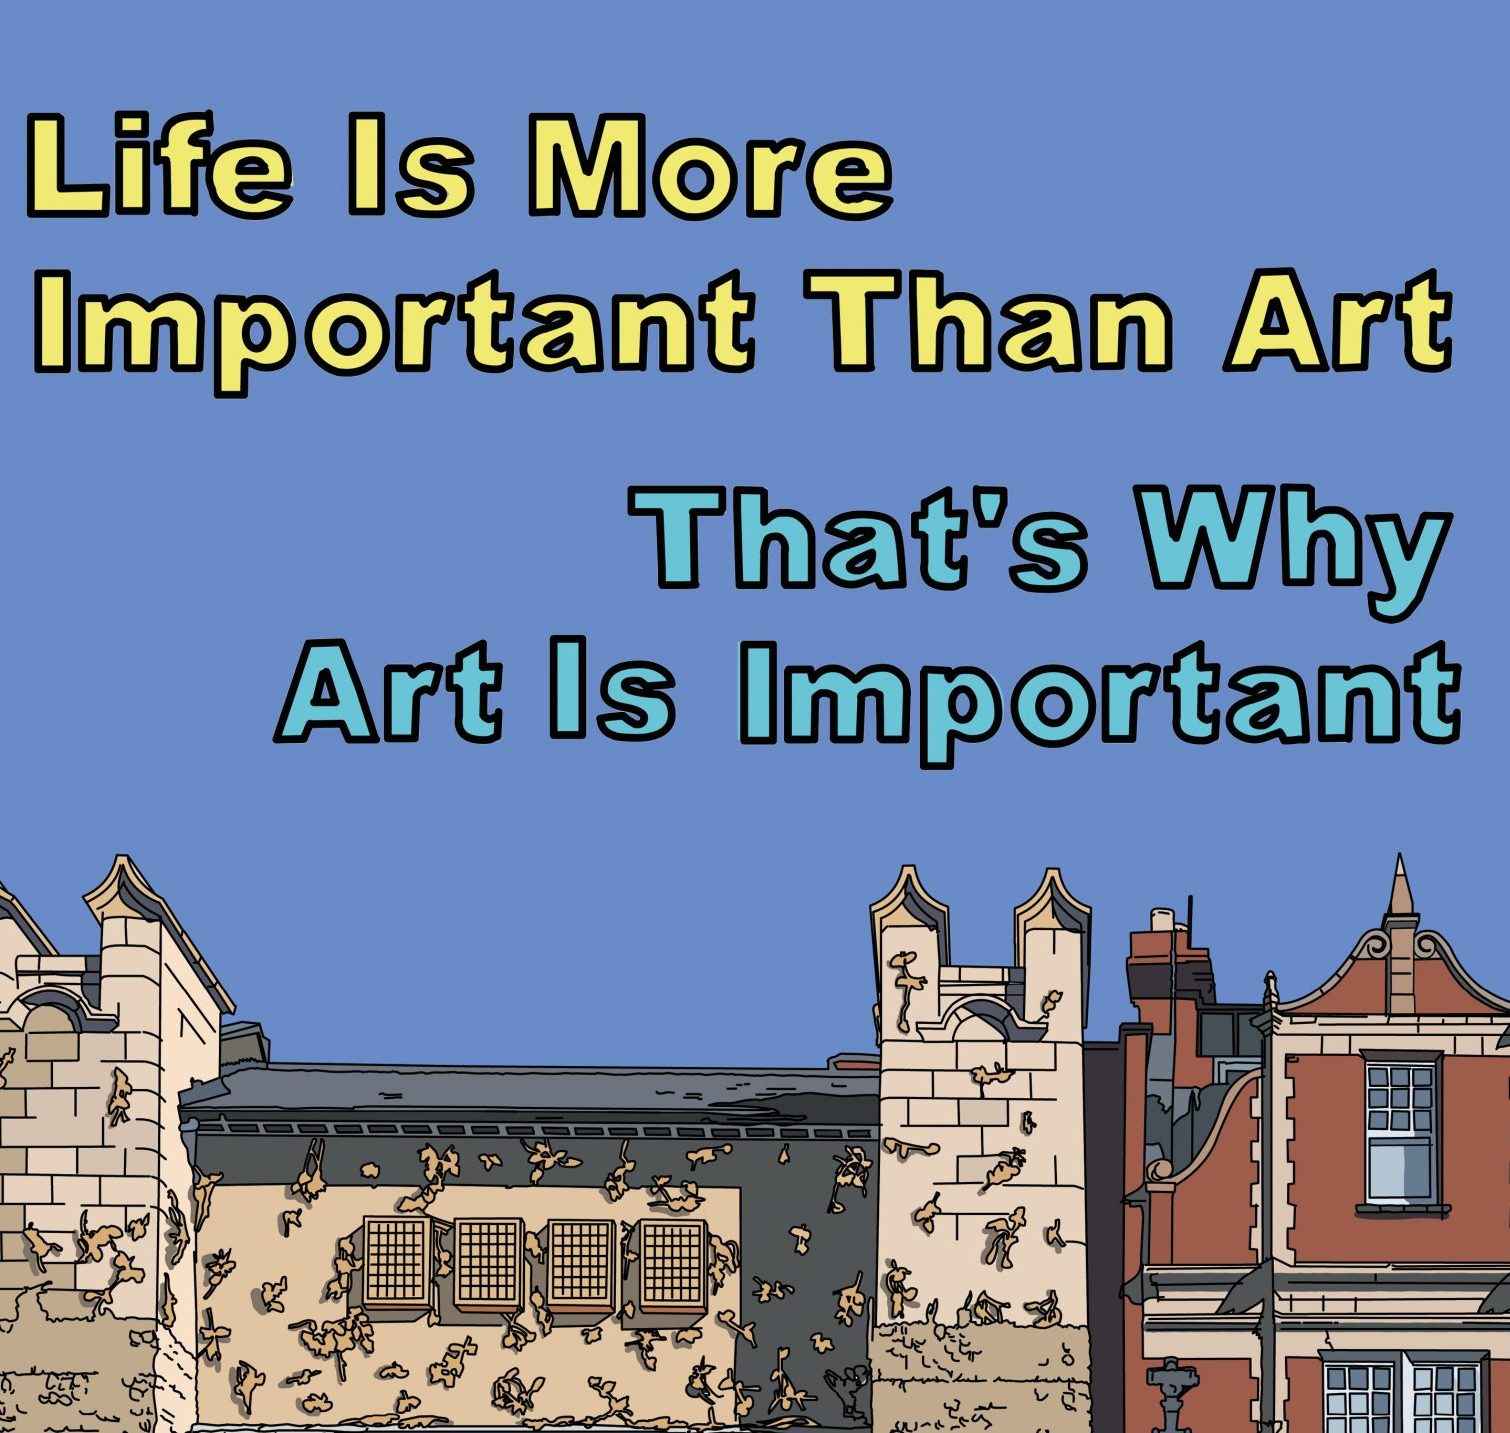 Life is More Important Than Art